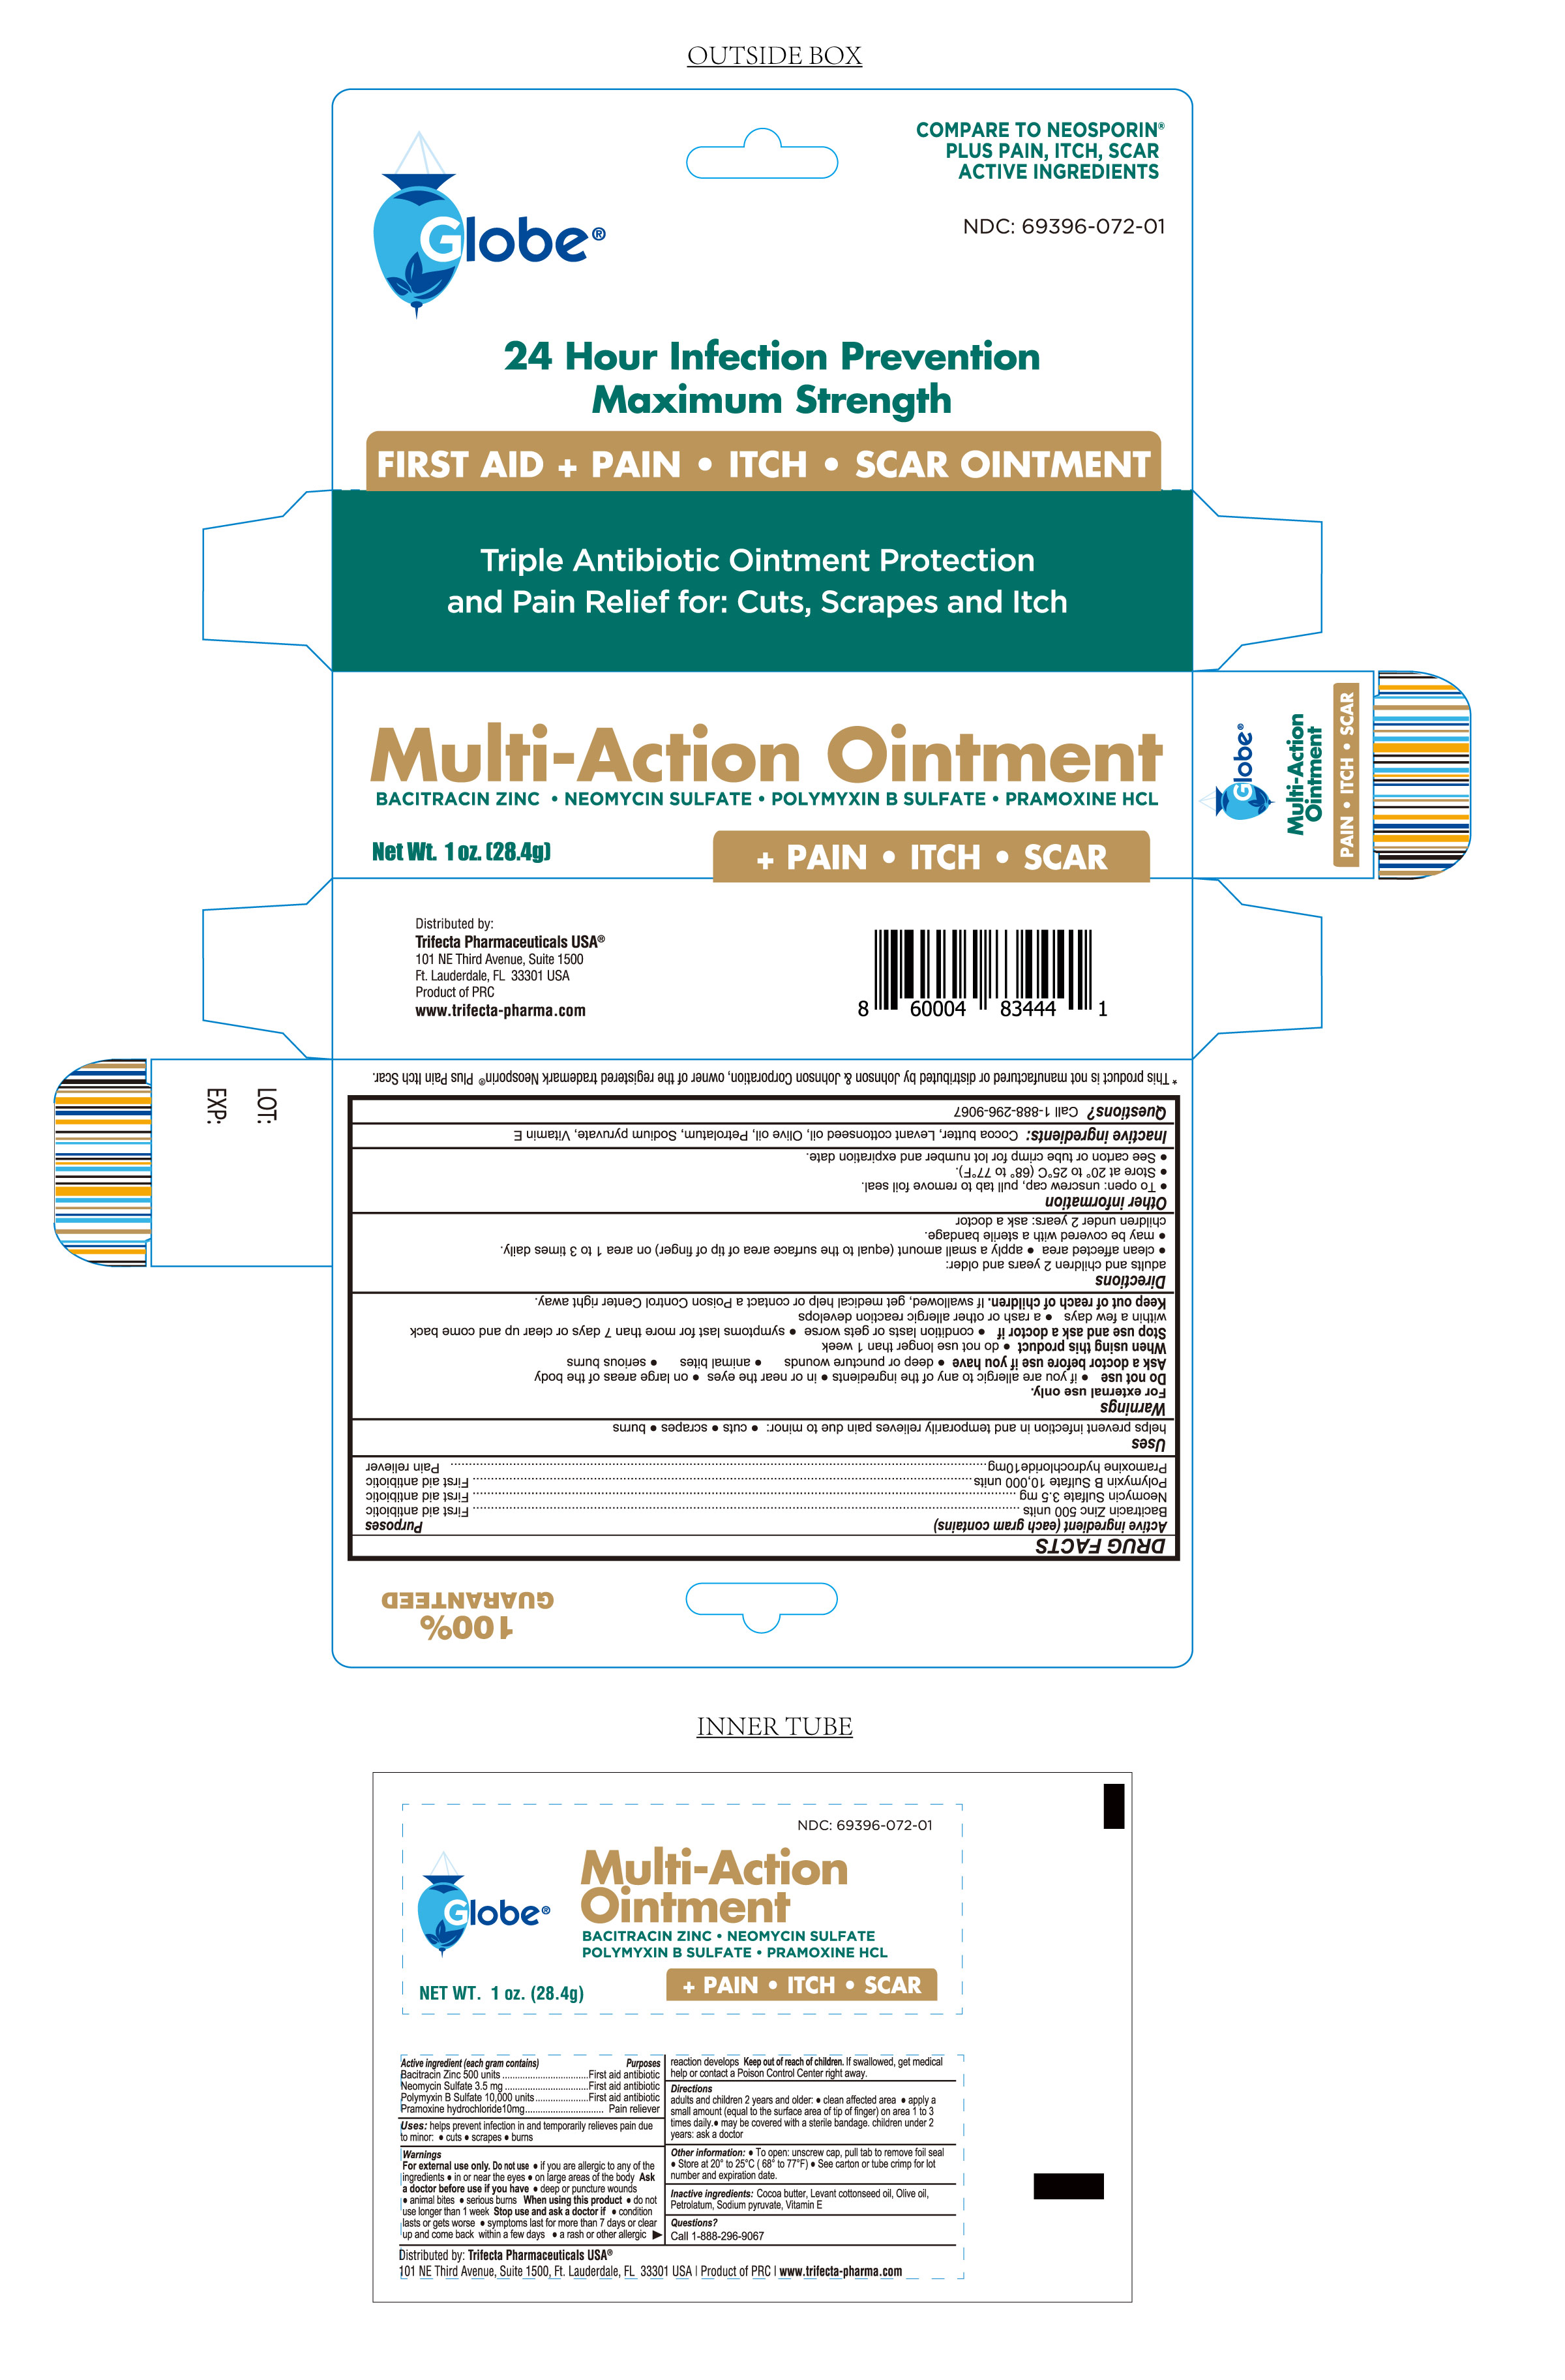 multi action ointment pain and scar 1oz